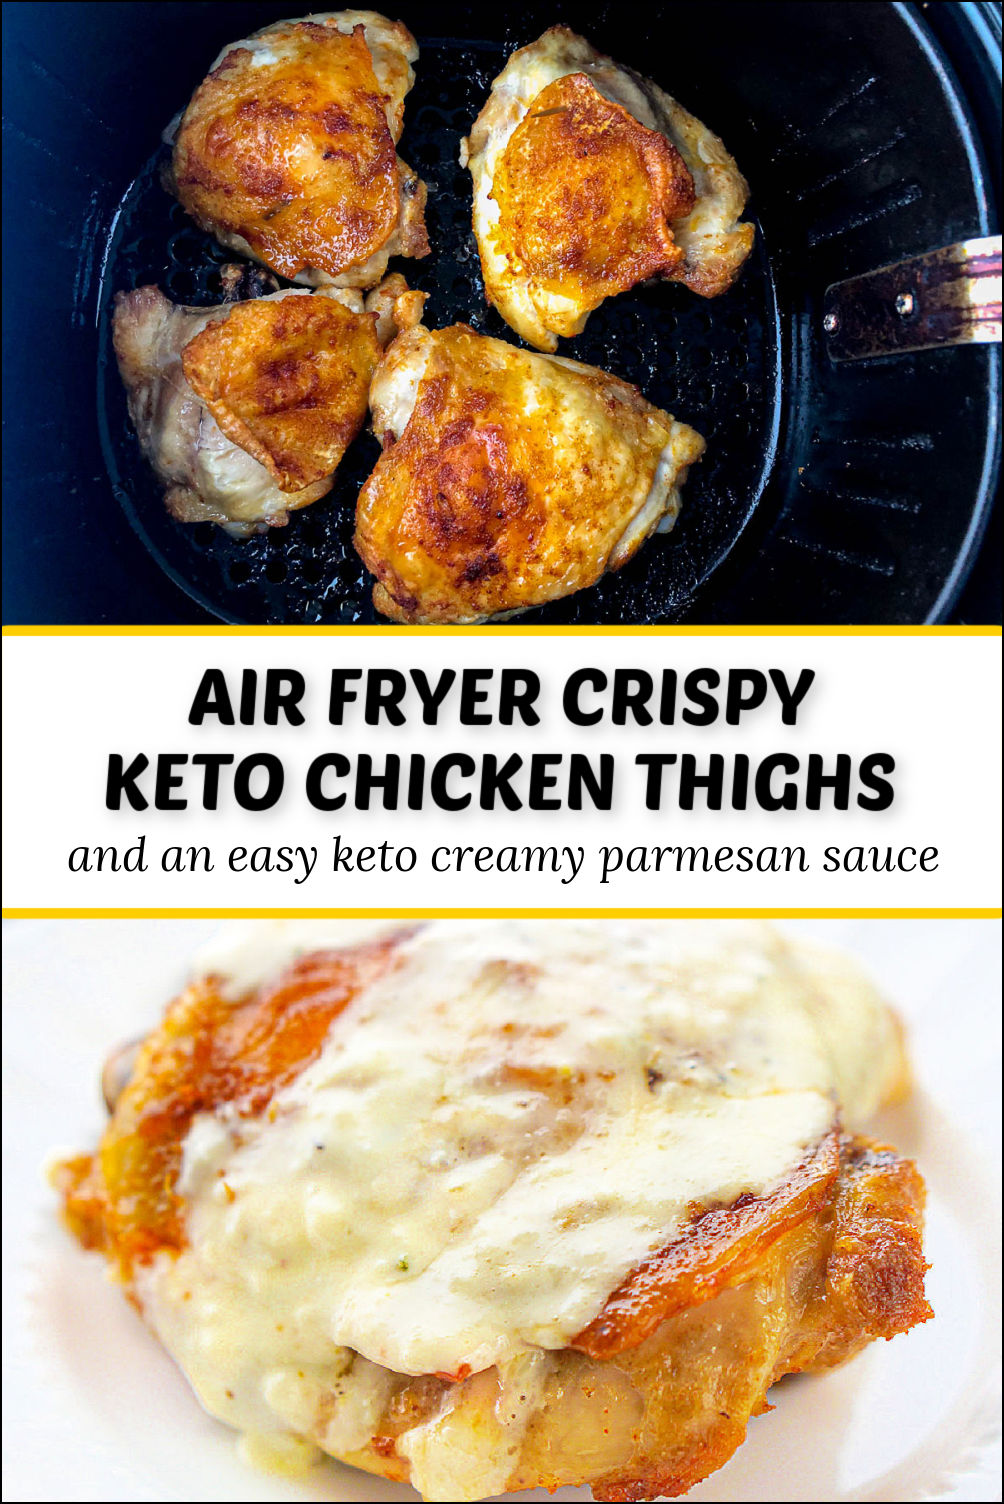 air fryer basket and plate with chicken and creamy parmesan sauce and text